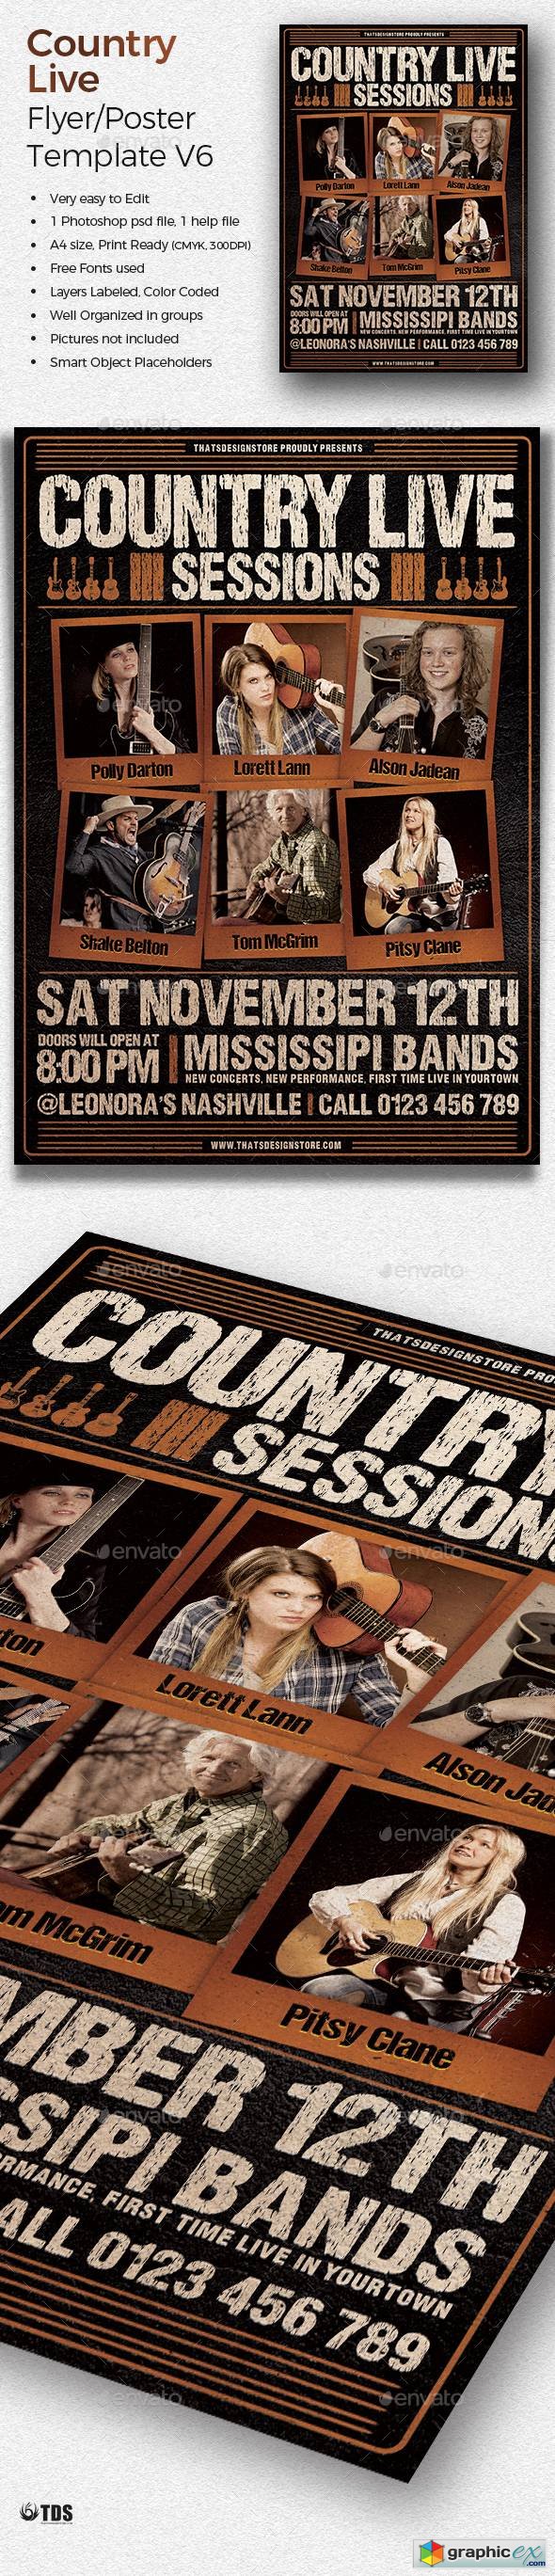 Country Live Flyer Template V6